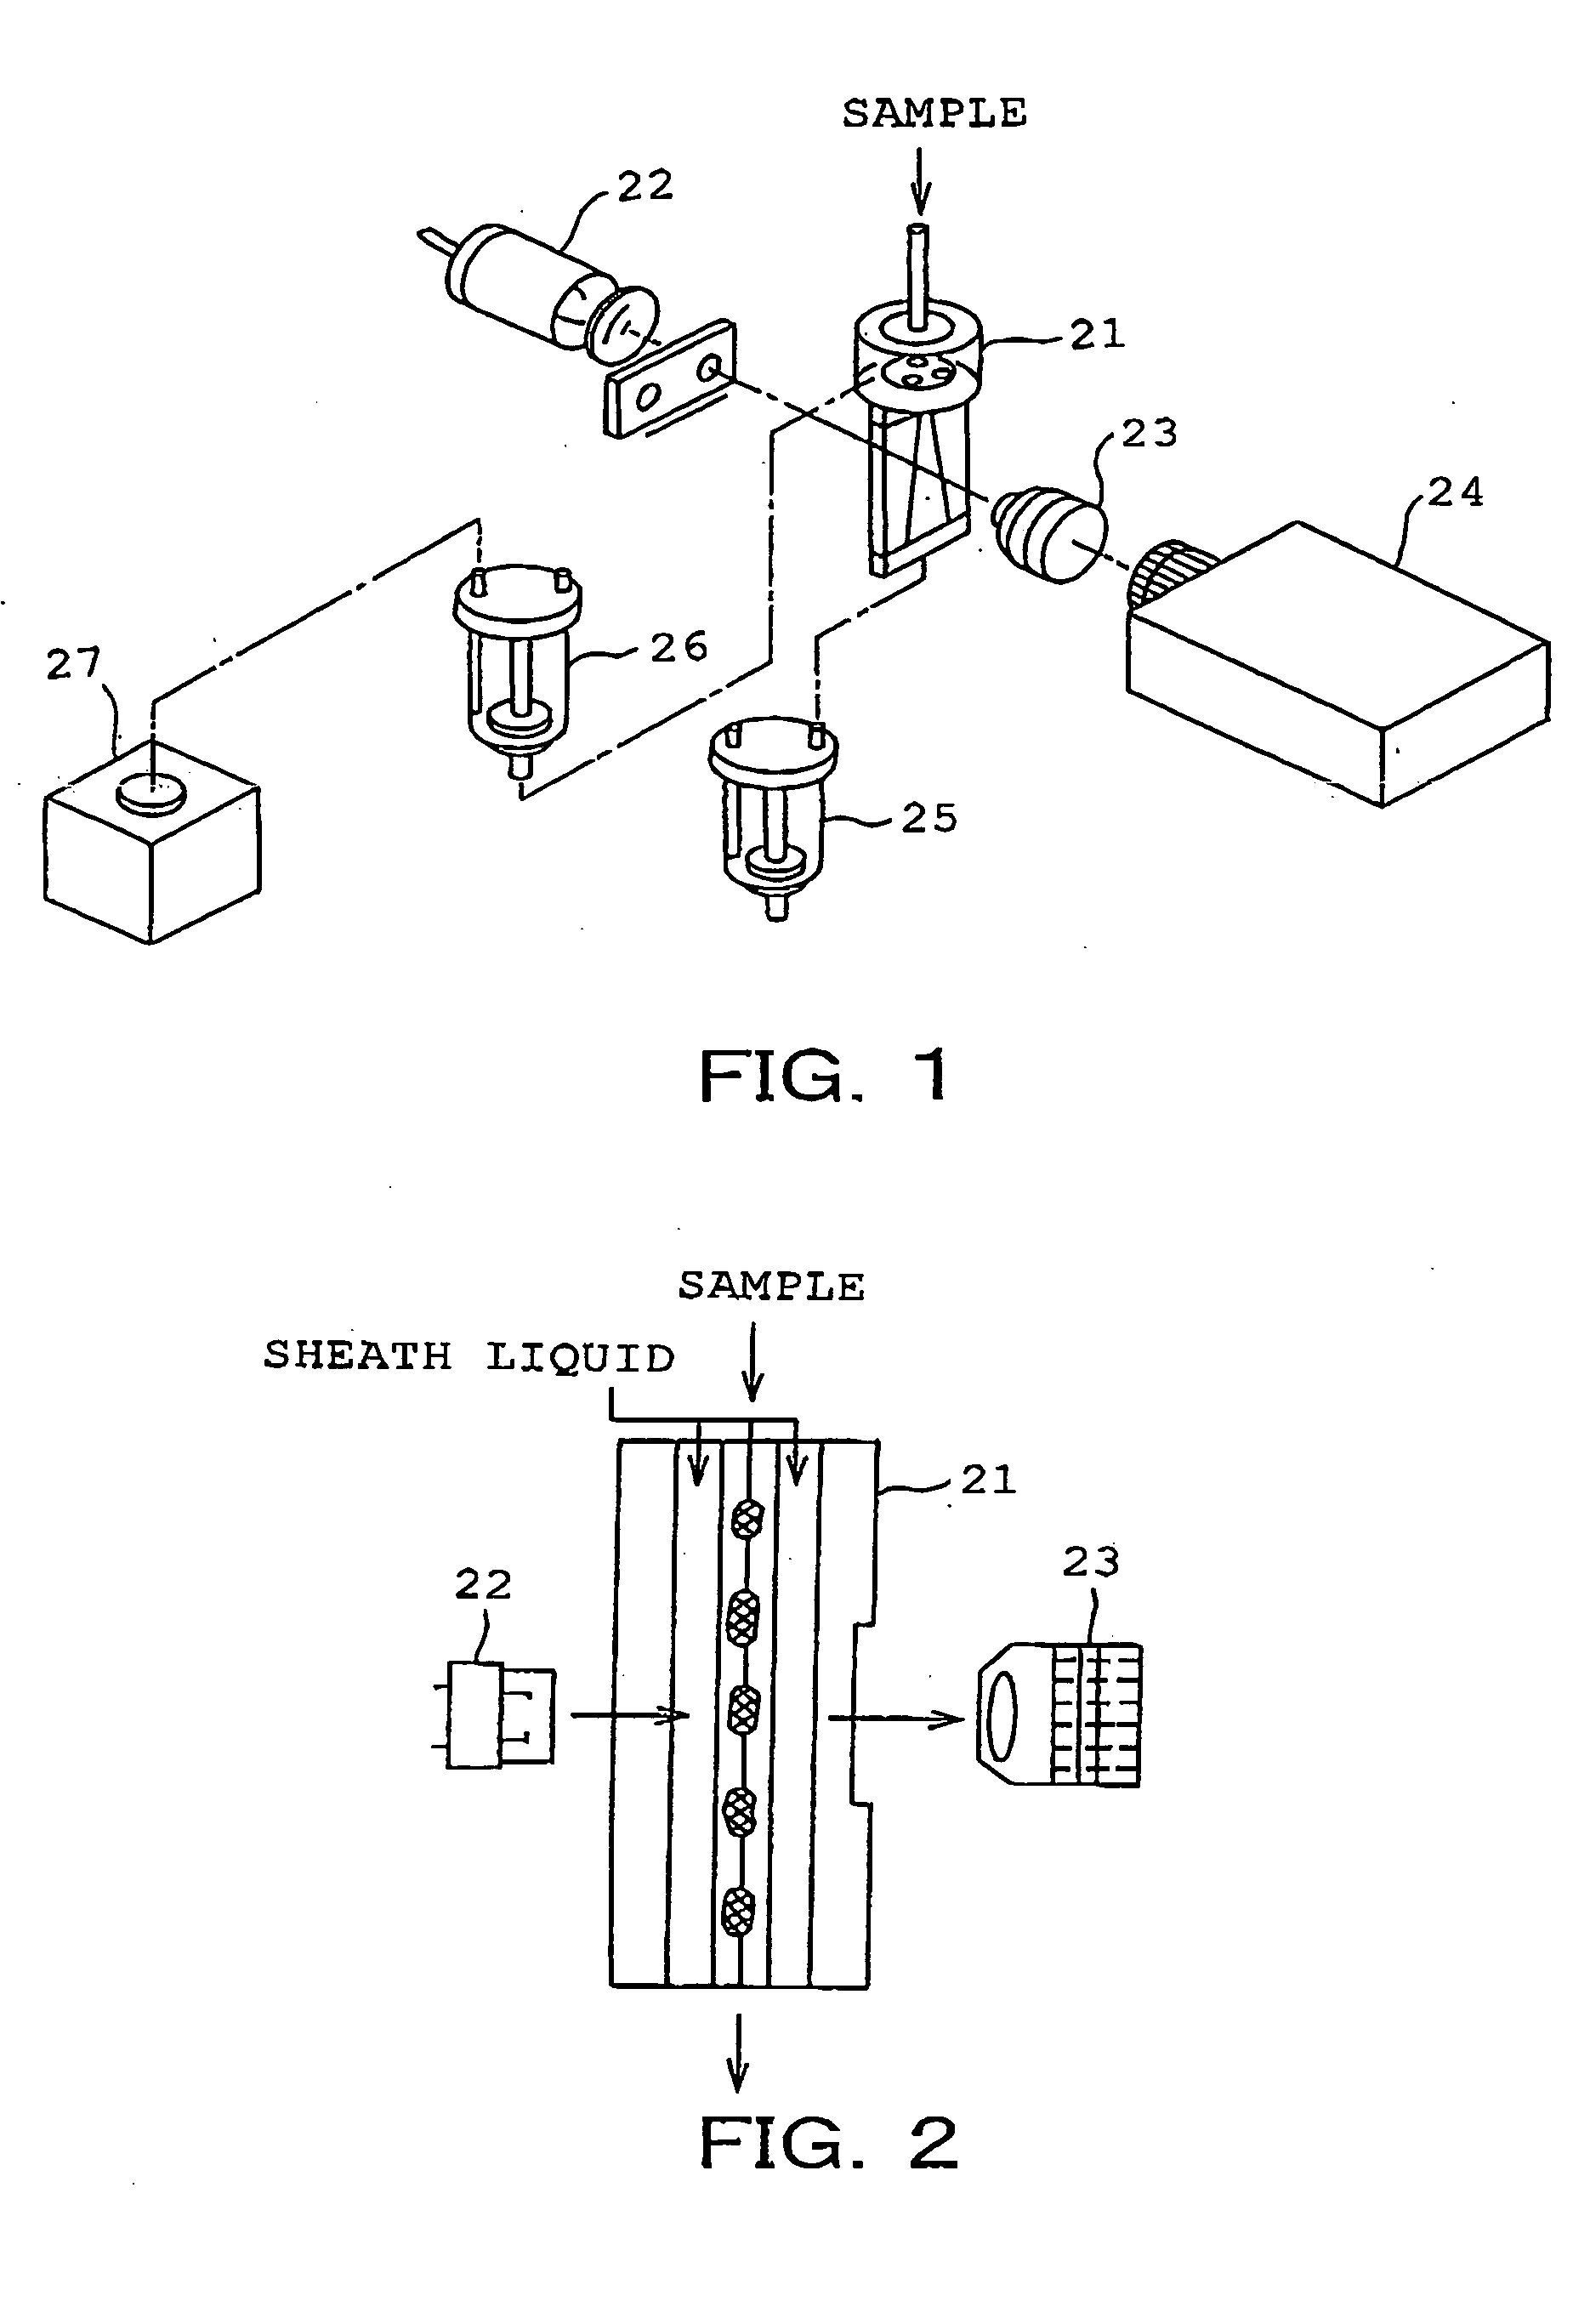 One-component magnetic toner for developing an electrostatic charge image, process cartridge, and method for recycling the process cartridge